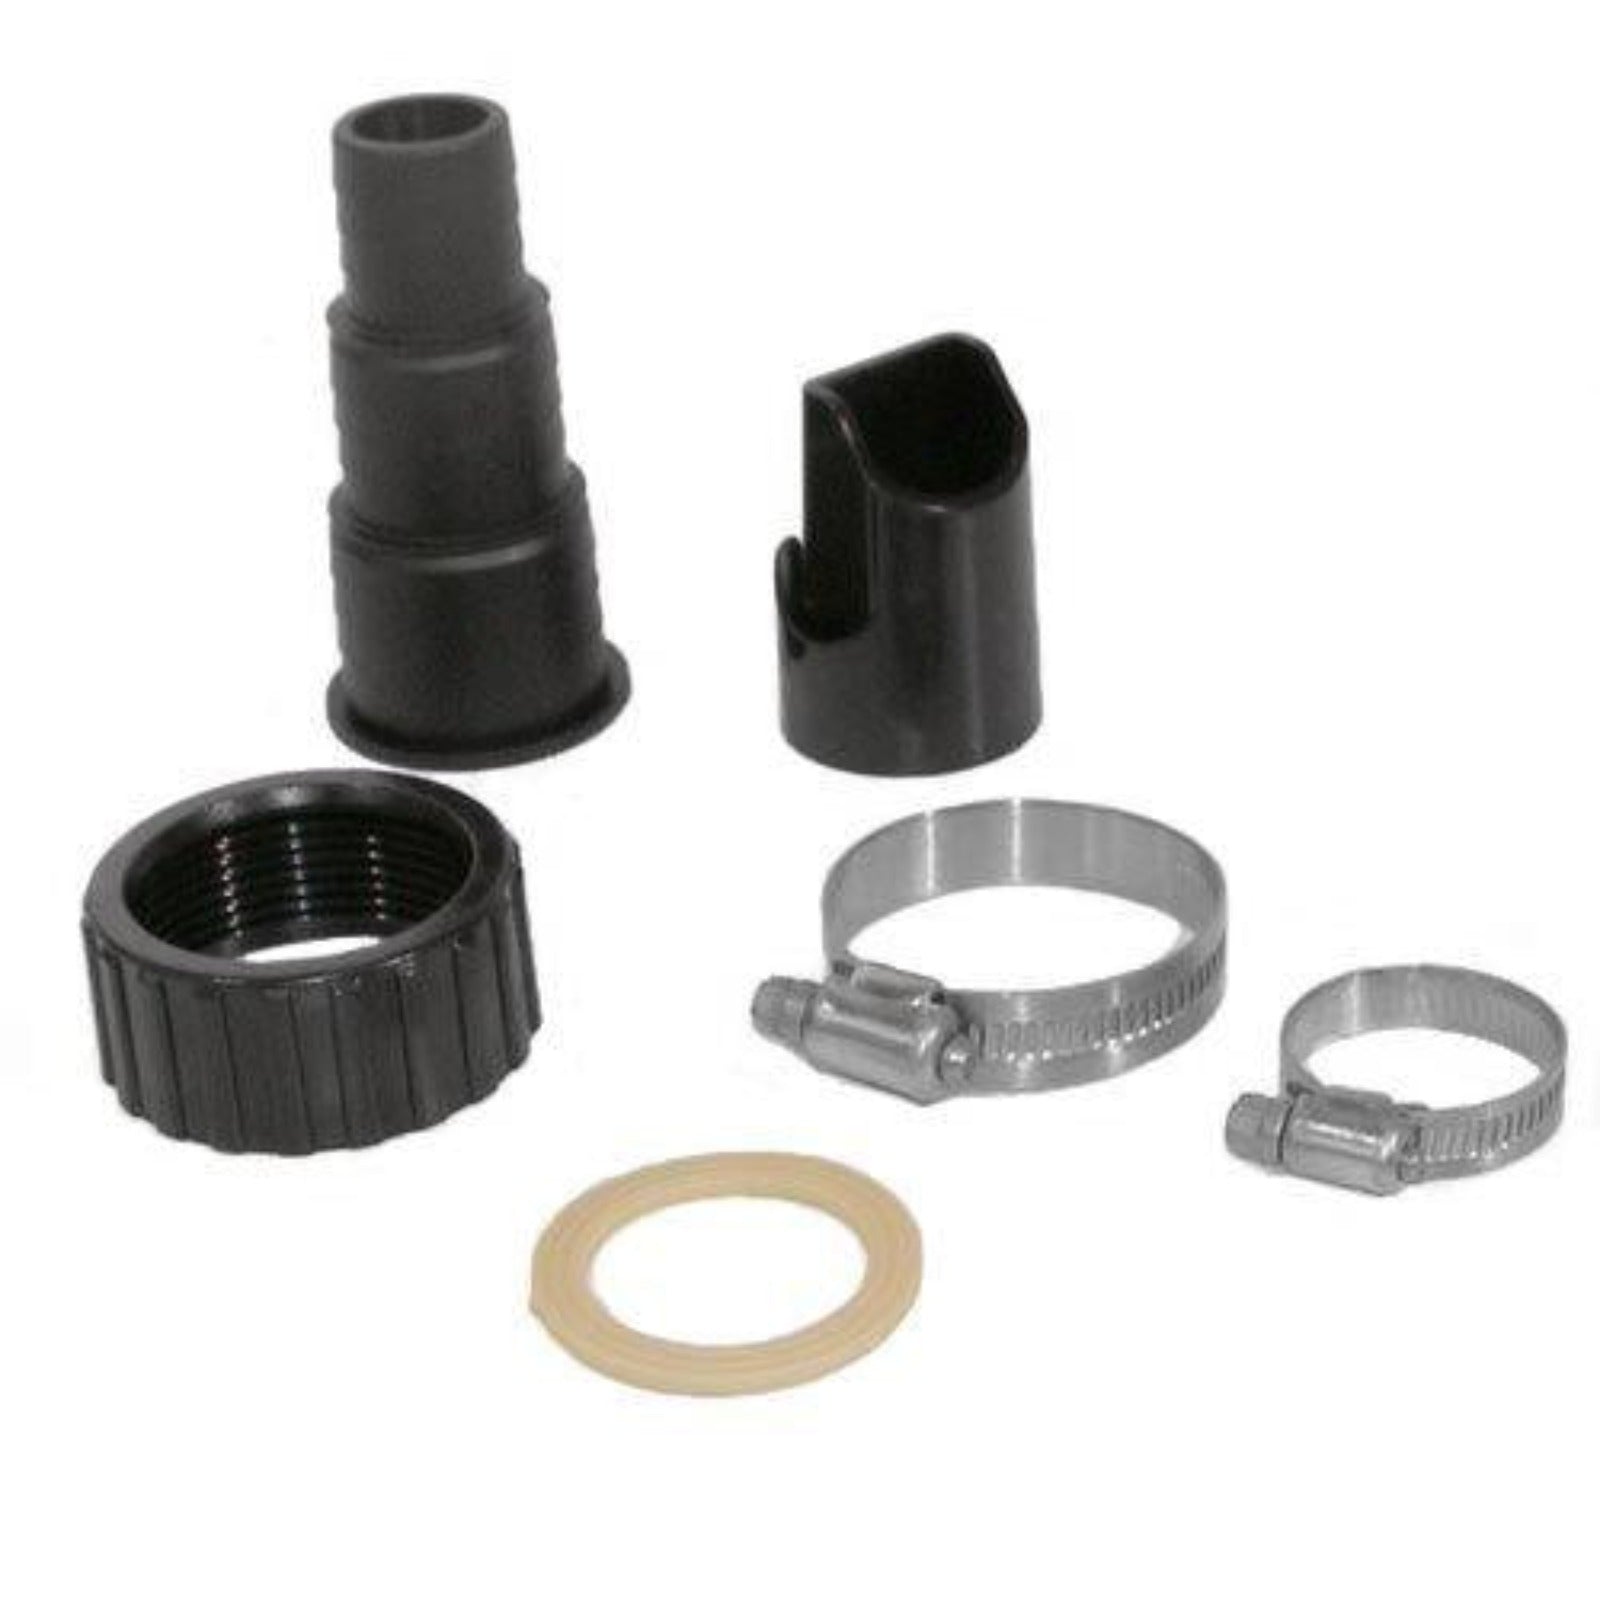 Oase Bitron C 18/24w Inlet Additional Fittings Pack